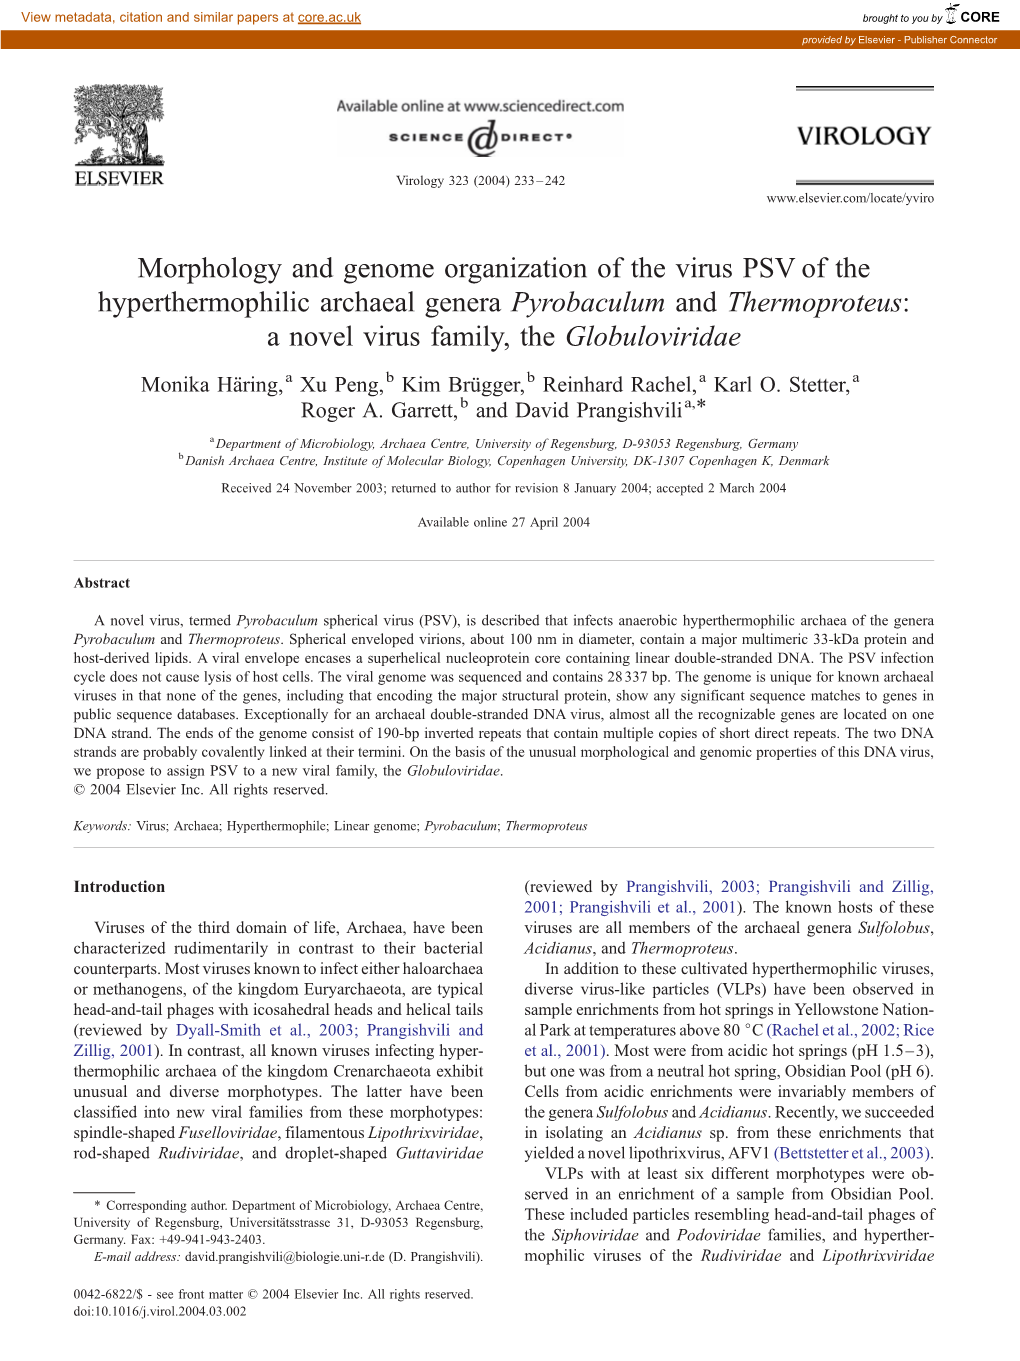 Morphology and Genome Organization of the Virus PSV of the Hyperthermophilic Archaeal Genera Pyrobaculum and Thermoproteus: a Novel Virus Family, the Globuloviridae